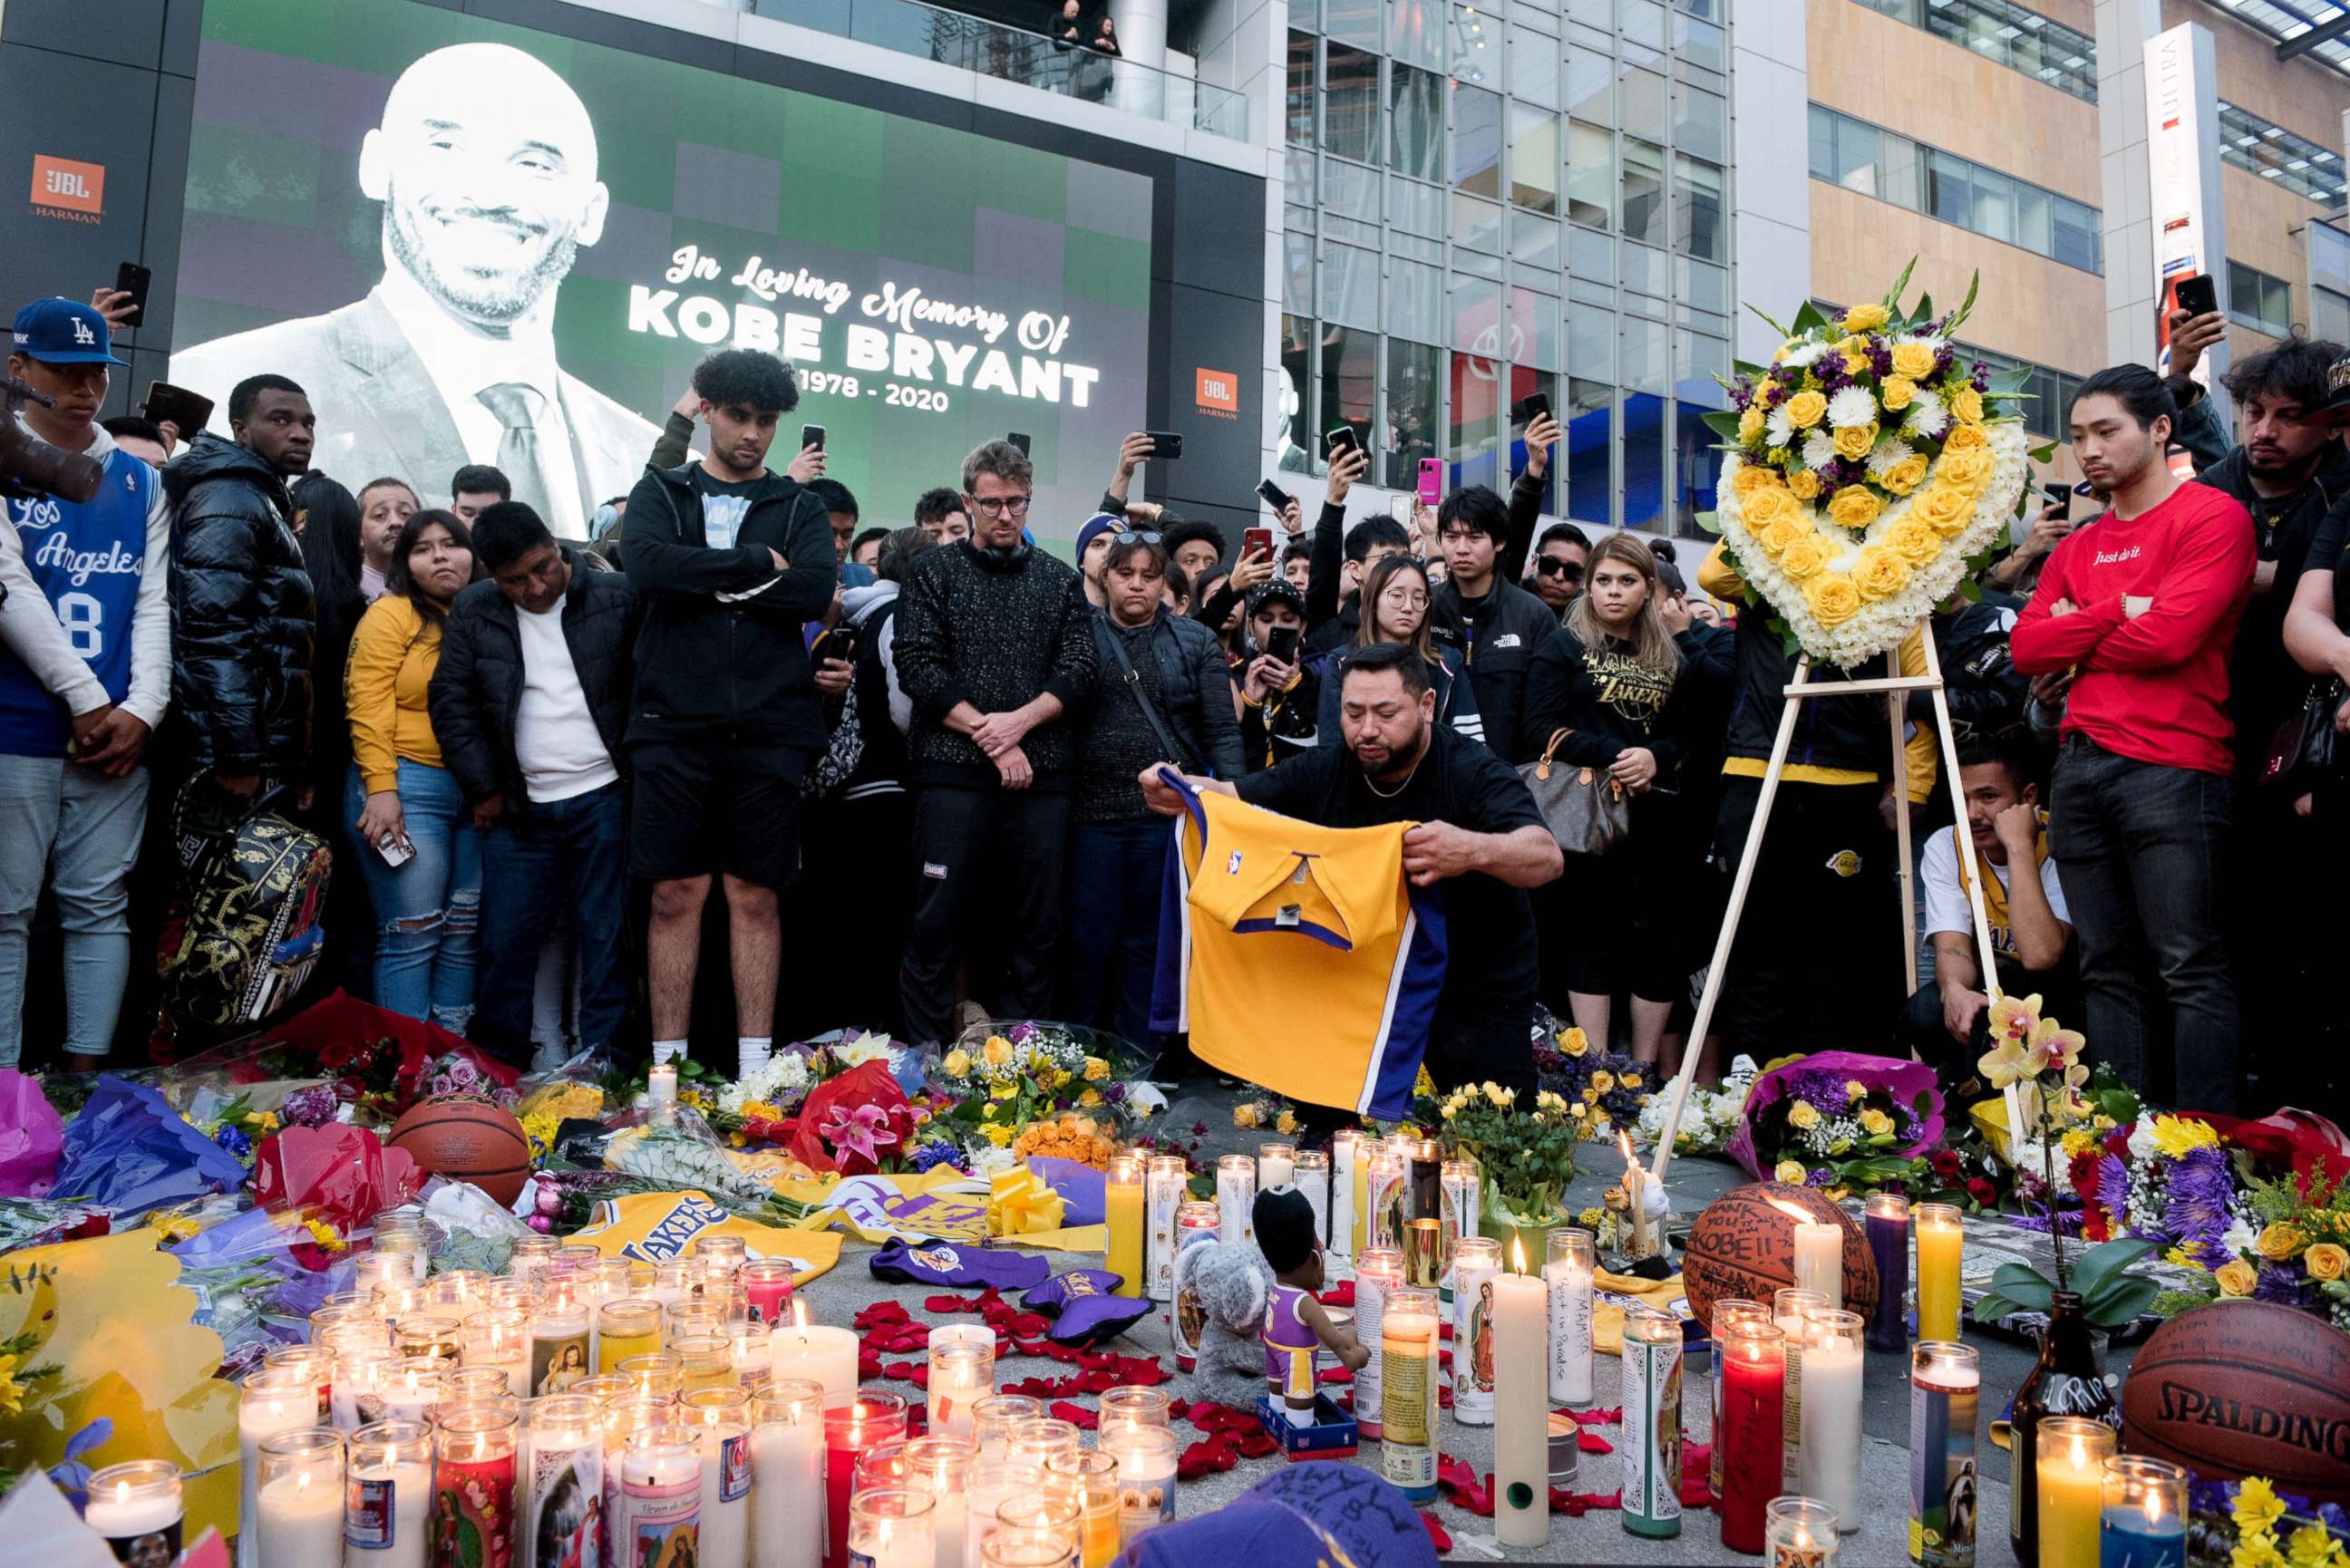 Kobe Bryant leaves a complicated legacy, on and off the court